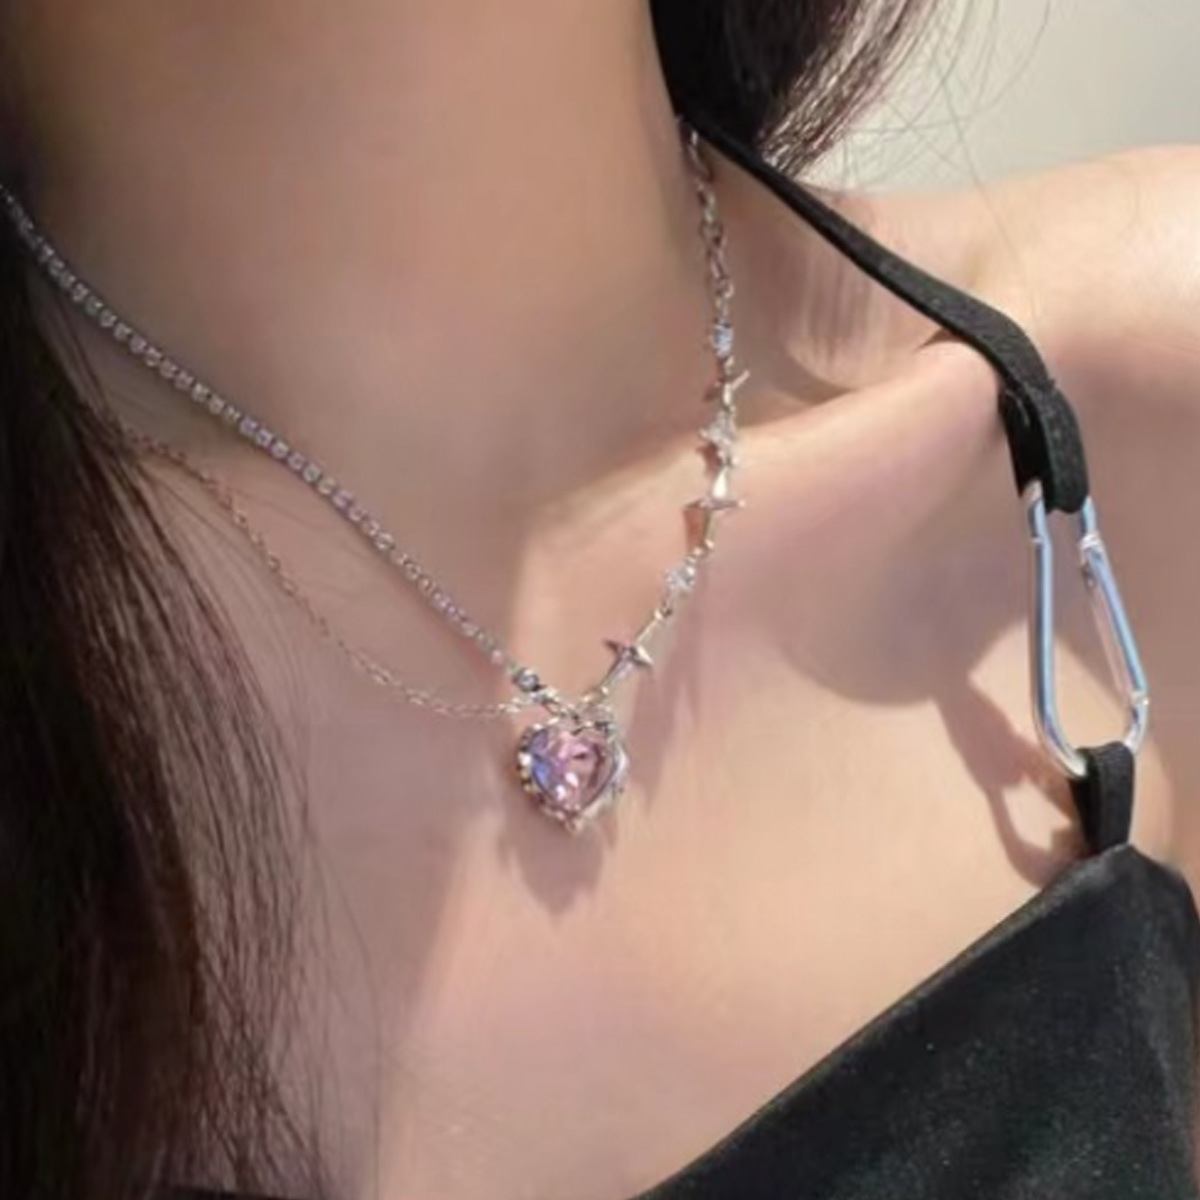 Fashion Peach Heart Star Pendant Necklace Women Pink Crystal Egirl Sweet Cool Clavicle Chain Aesthetic Jewelry